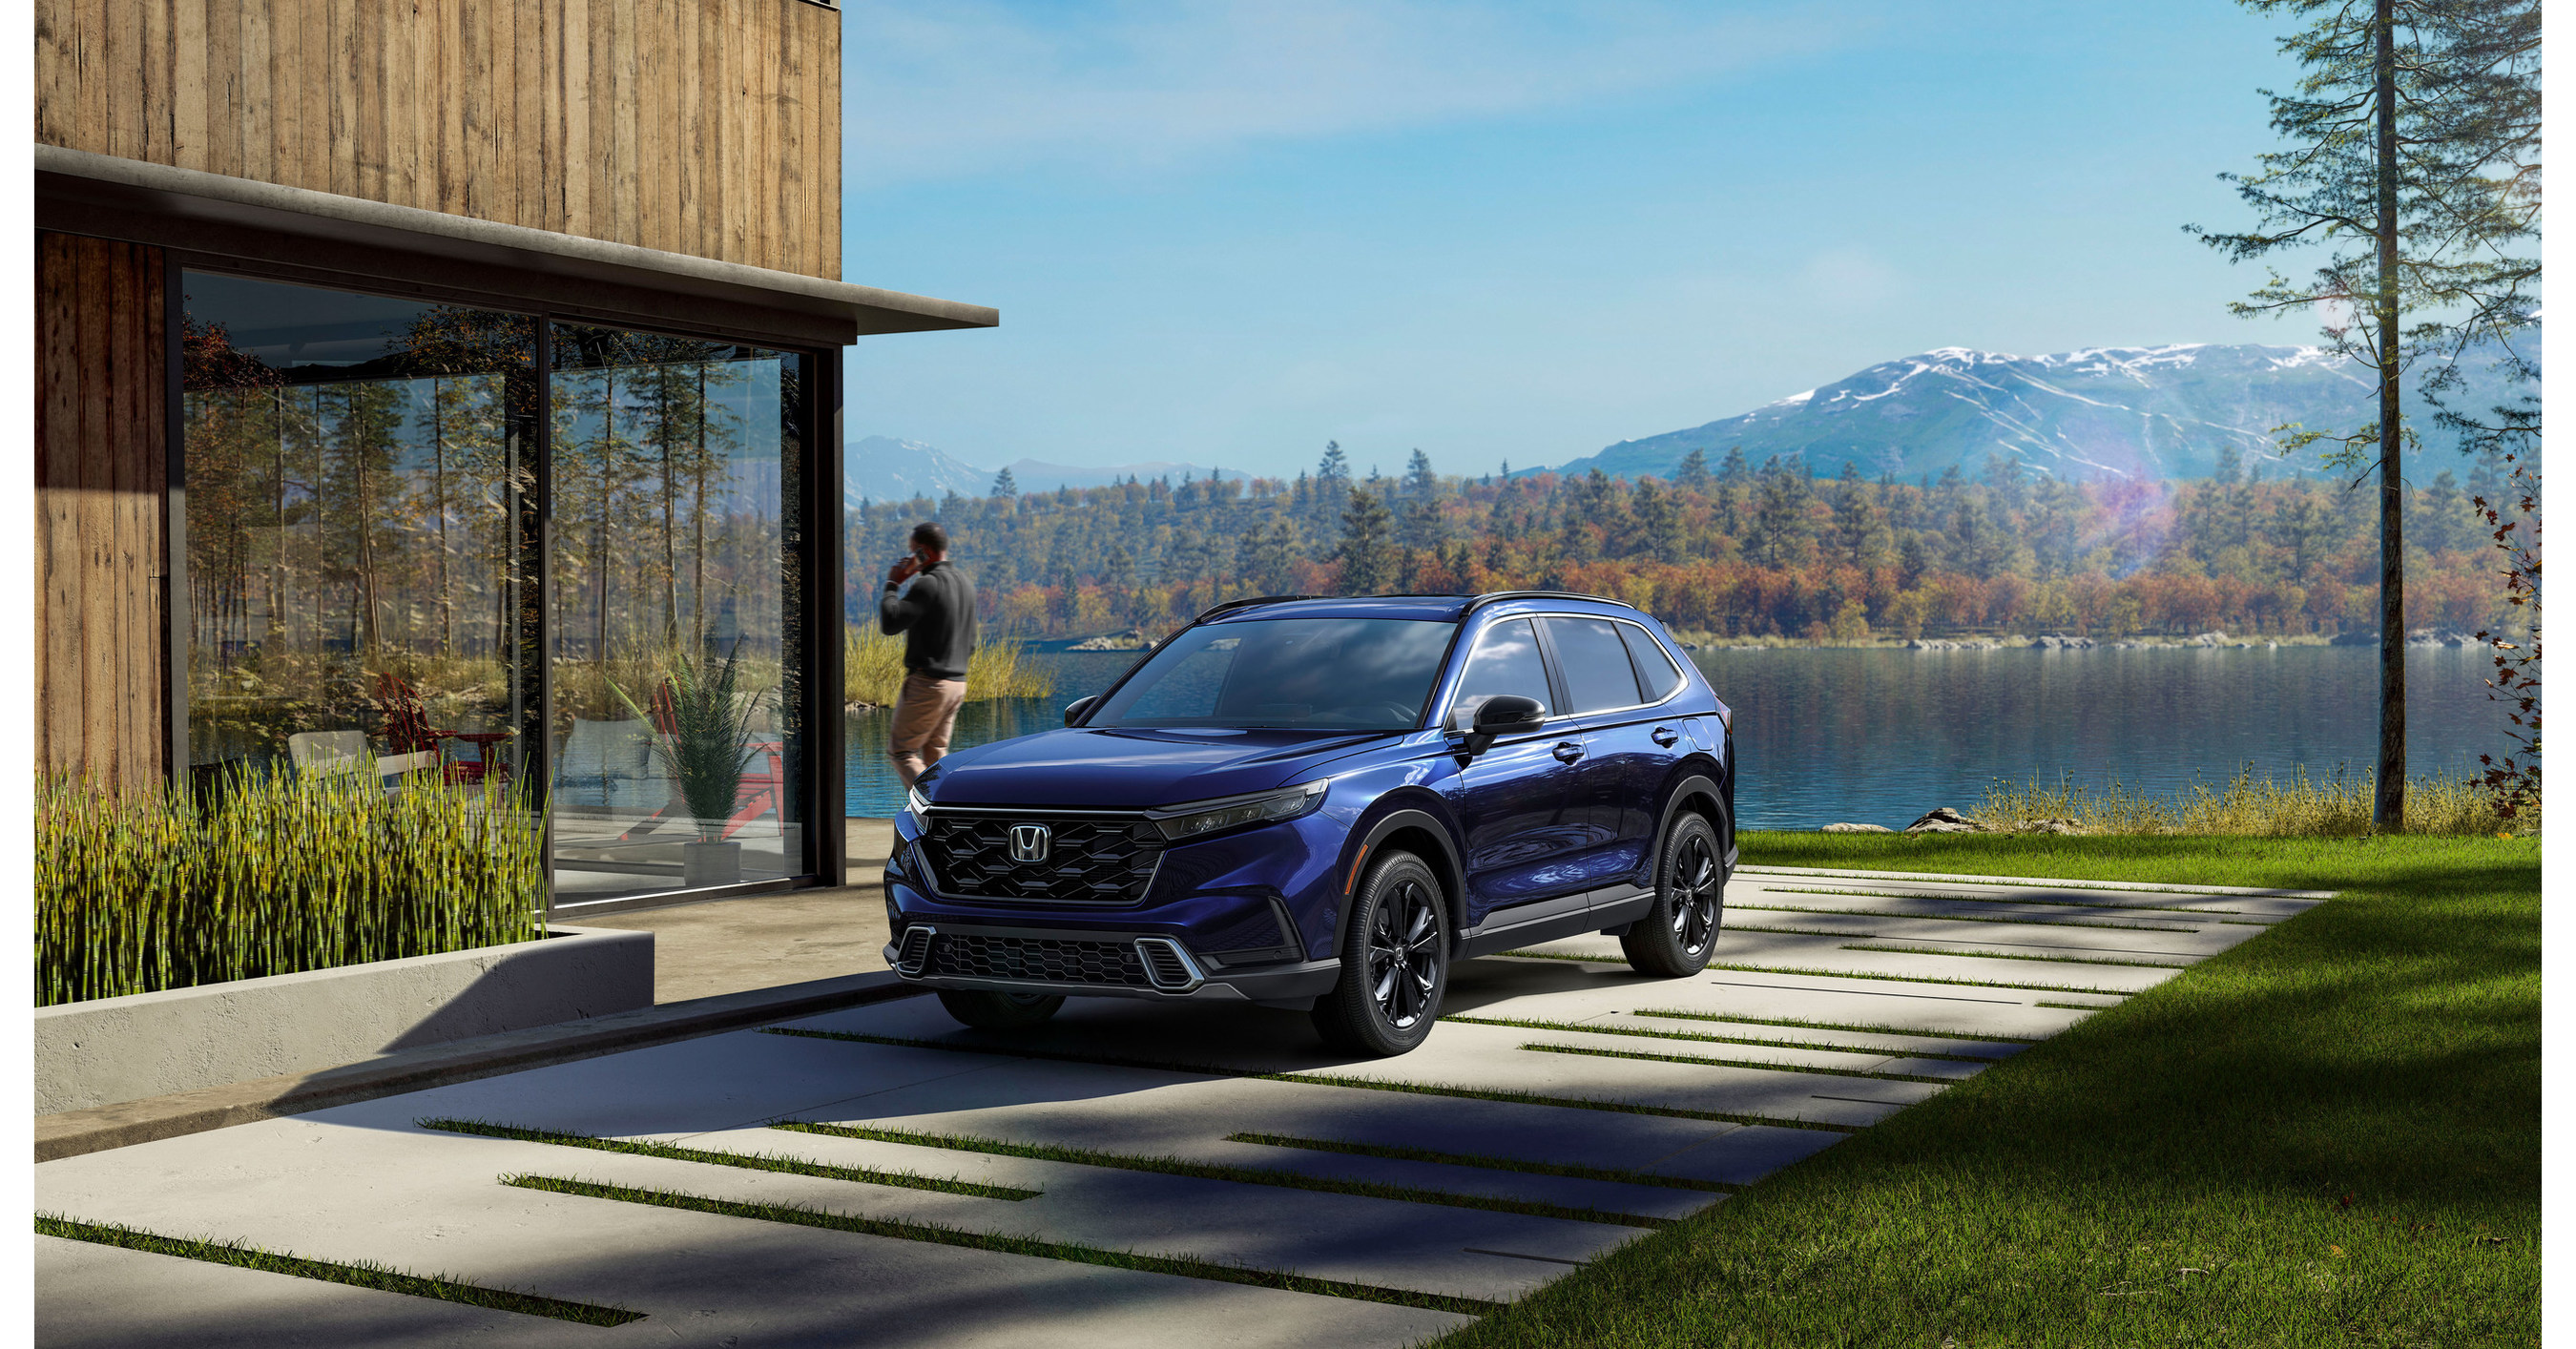 America's Favorite SUV Gets Even Better: All-New Honda CR-V Gets a Sophisticated and Rugged Design and More Advanced, Sporty Hybrid System